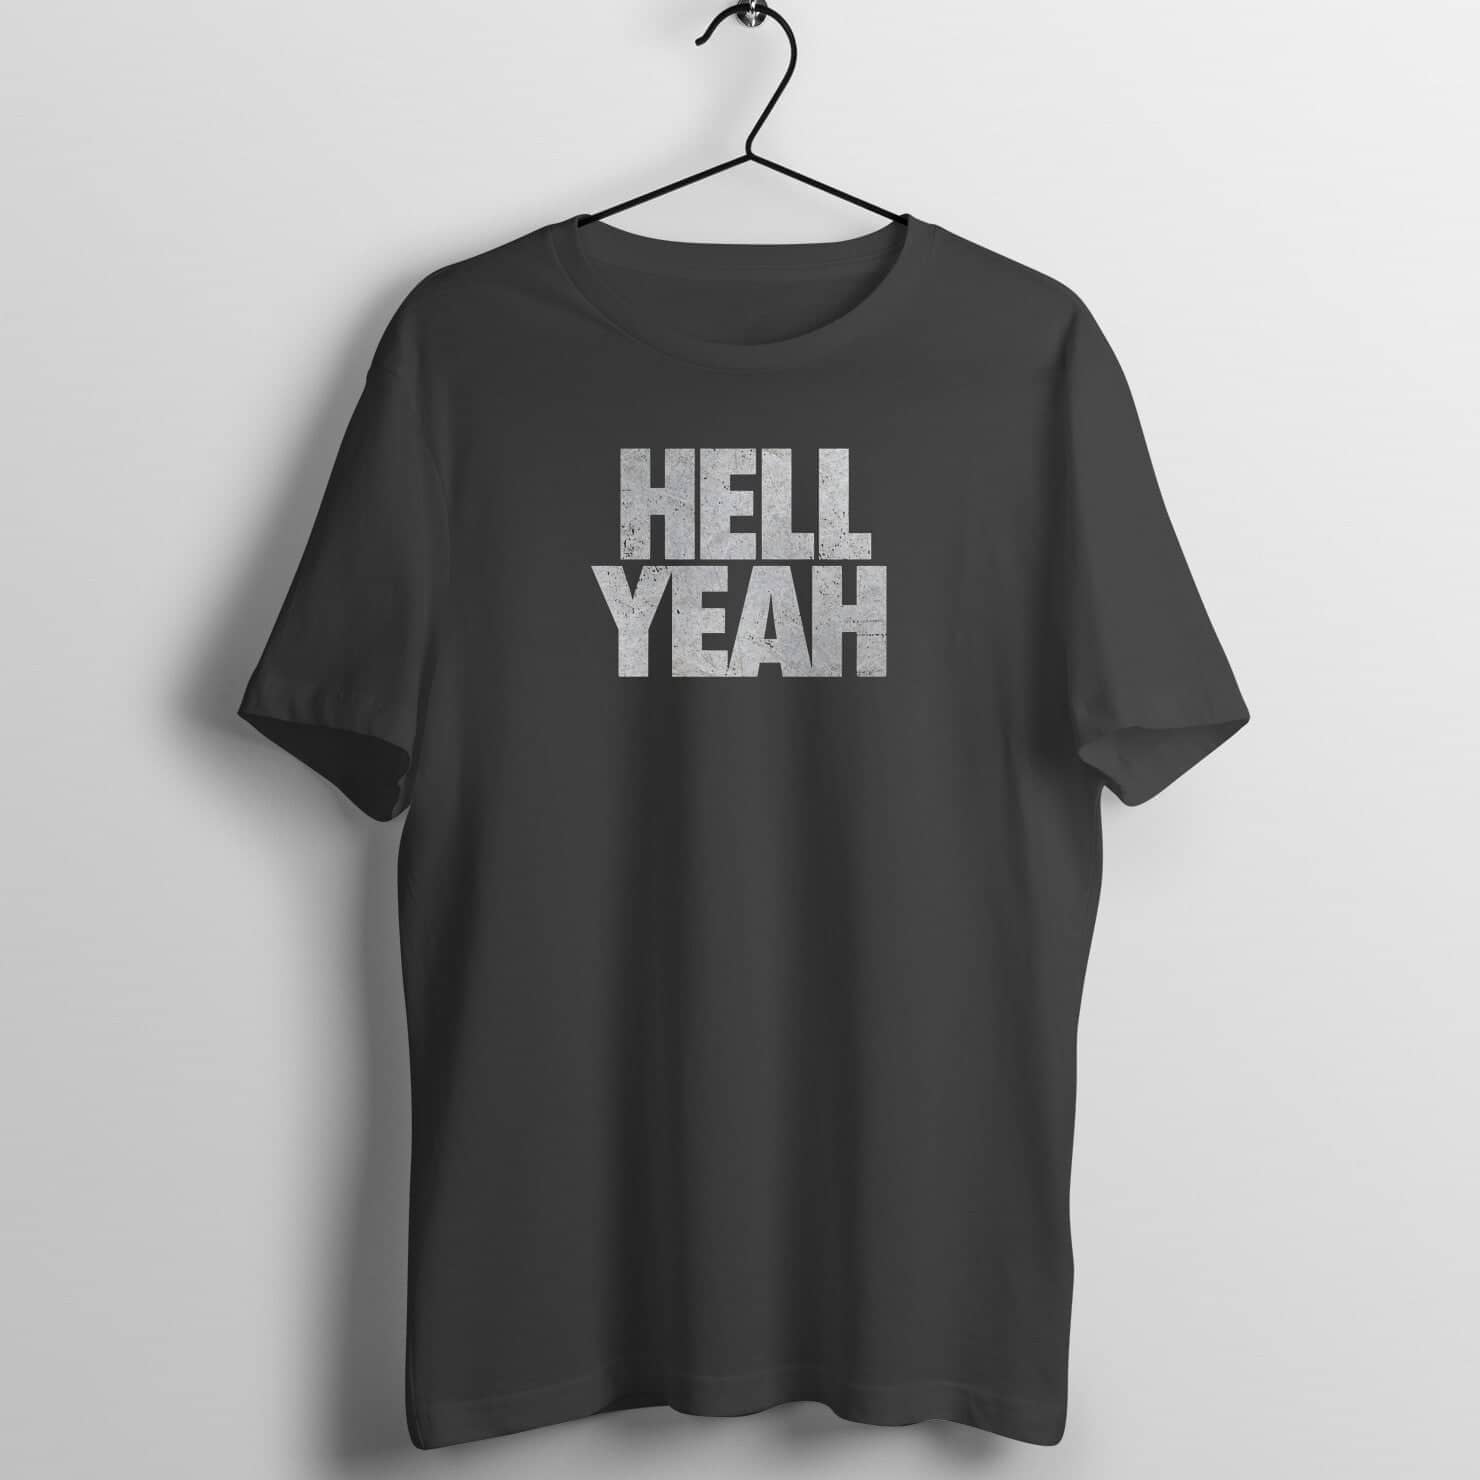 Hell Yeah Exclusive Black T Shirt for Men and Women freeshipping - Catch My Drift India